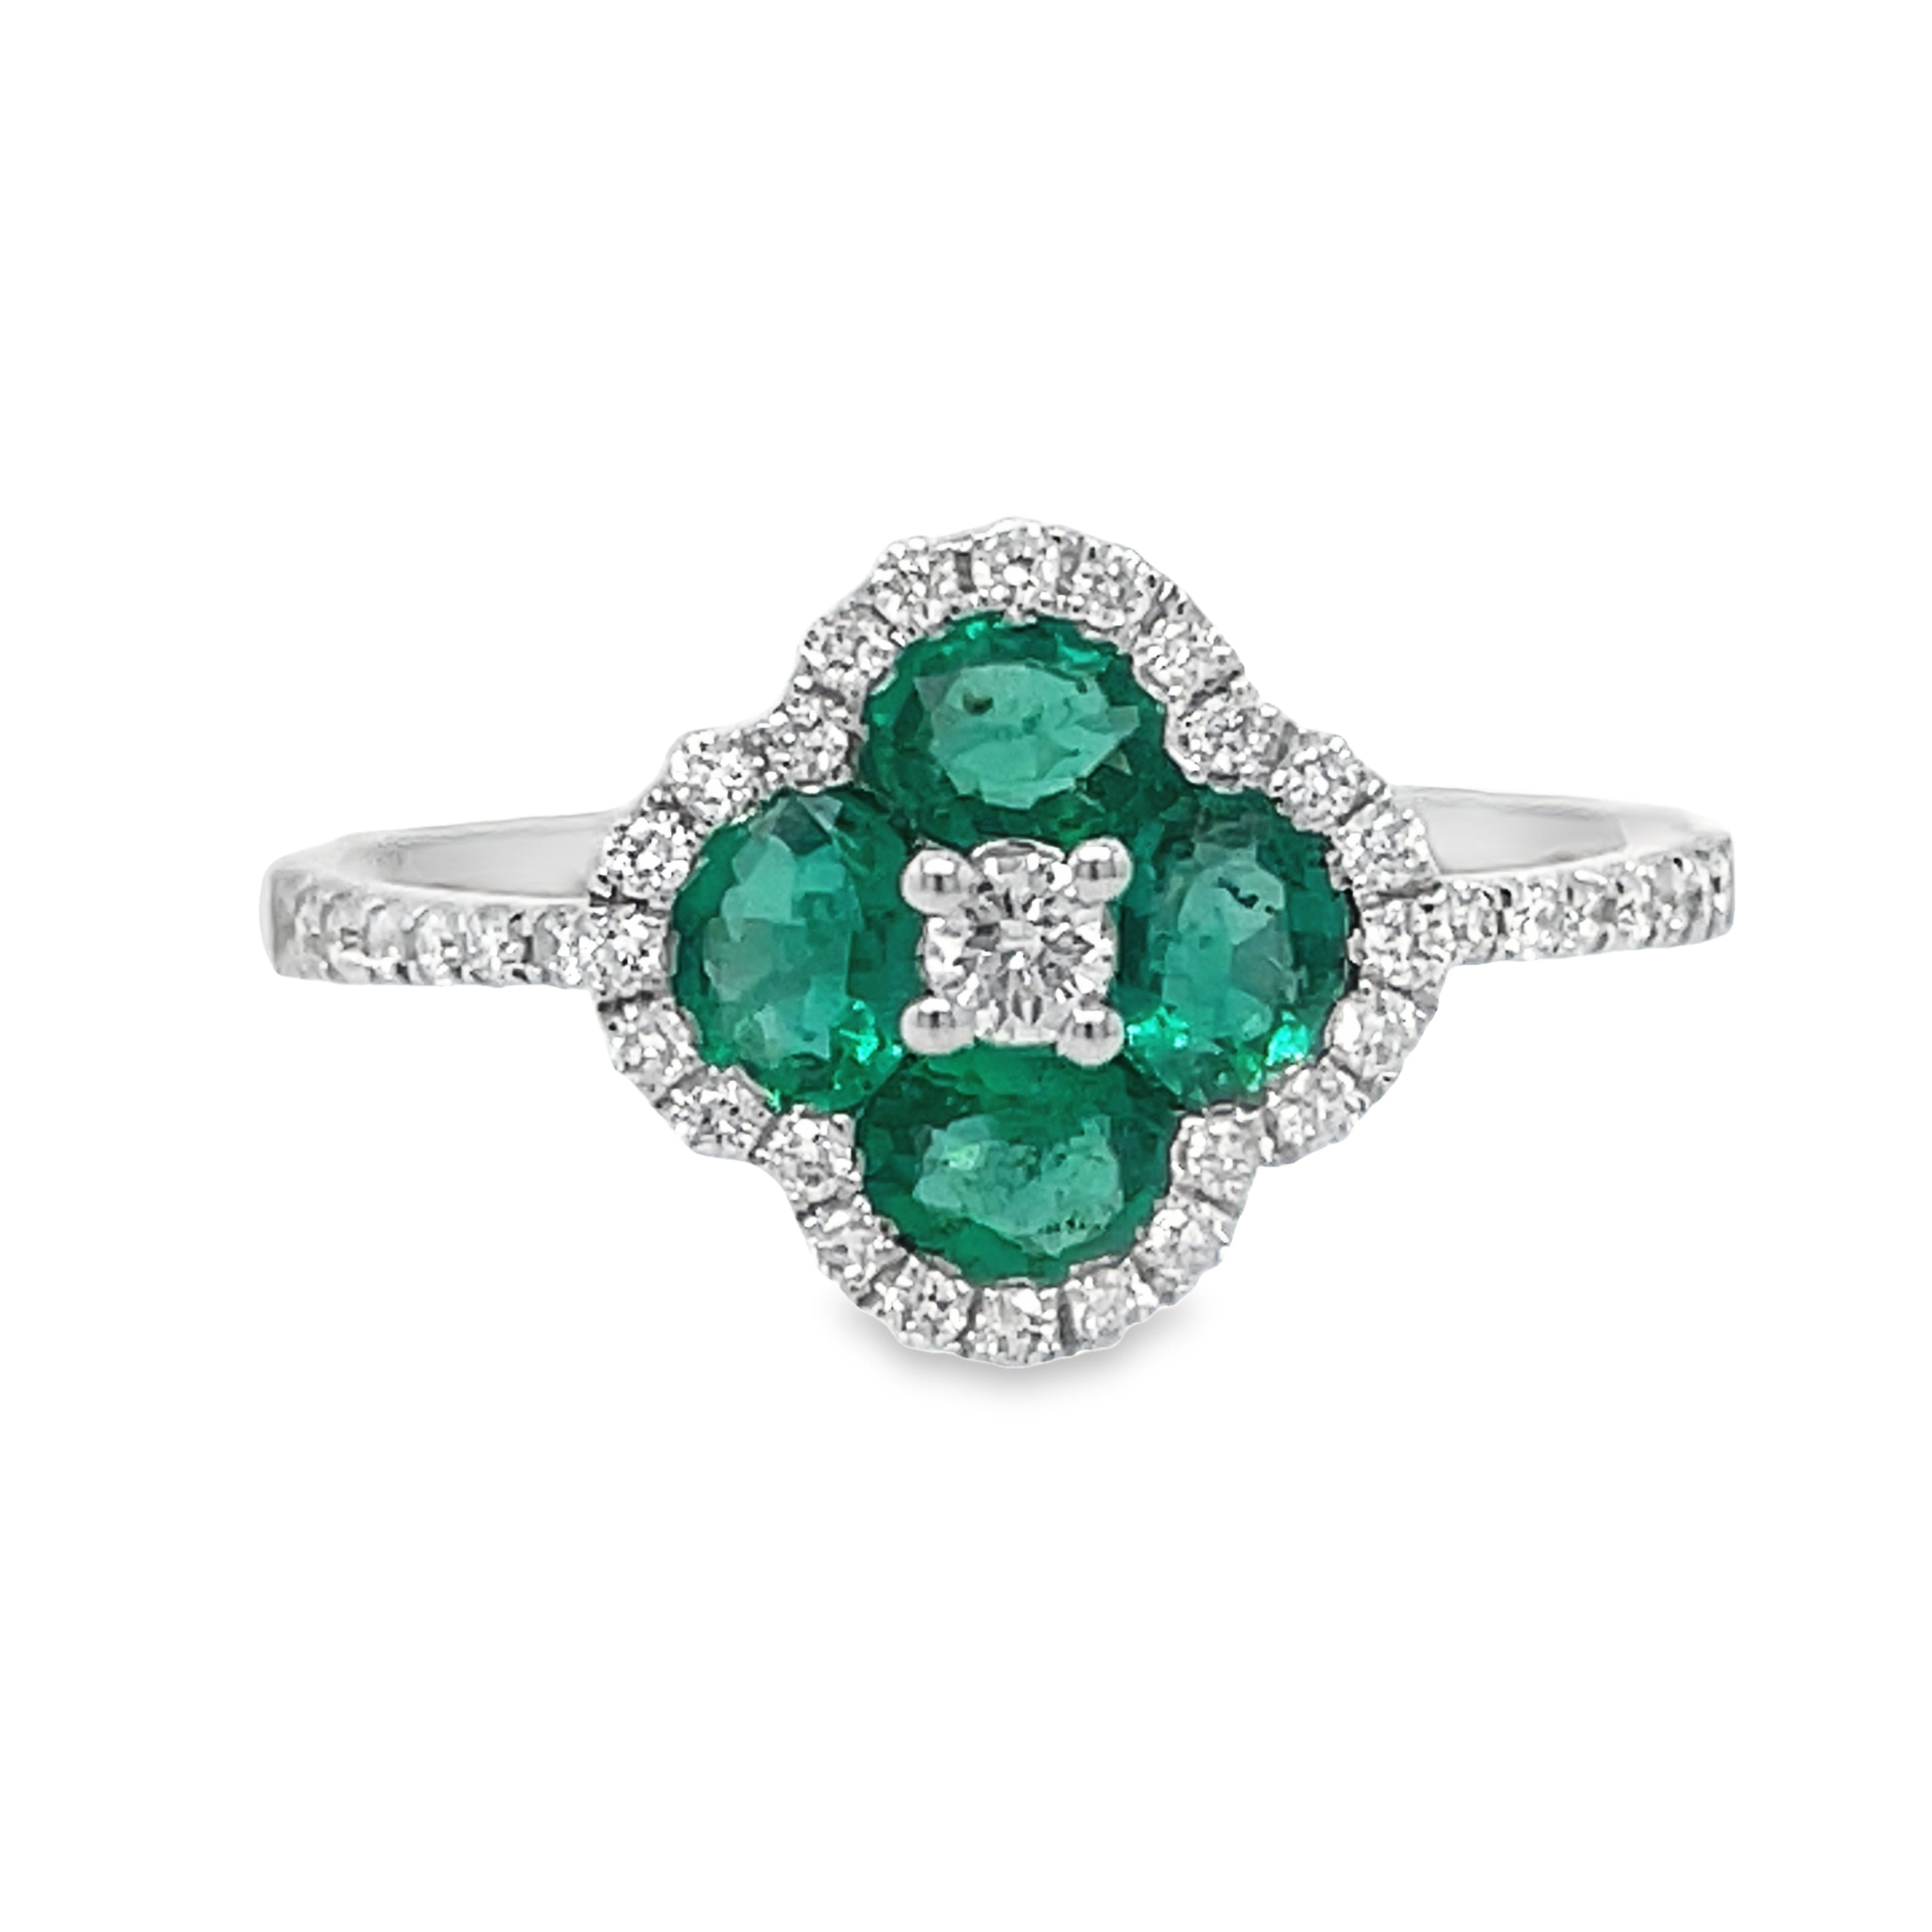 This elegant ring features a stunning floral design with a 14k yellow gold band, surrounded by sparkling white round diamonds totaling 0.25 carats. The centerpiece includes four round emeralds, totaling 0.70 carats and measuring 11mm in diameter. Add a touch of sophistication and luxury to any outfit with this beautiful piece.